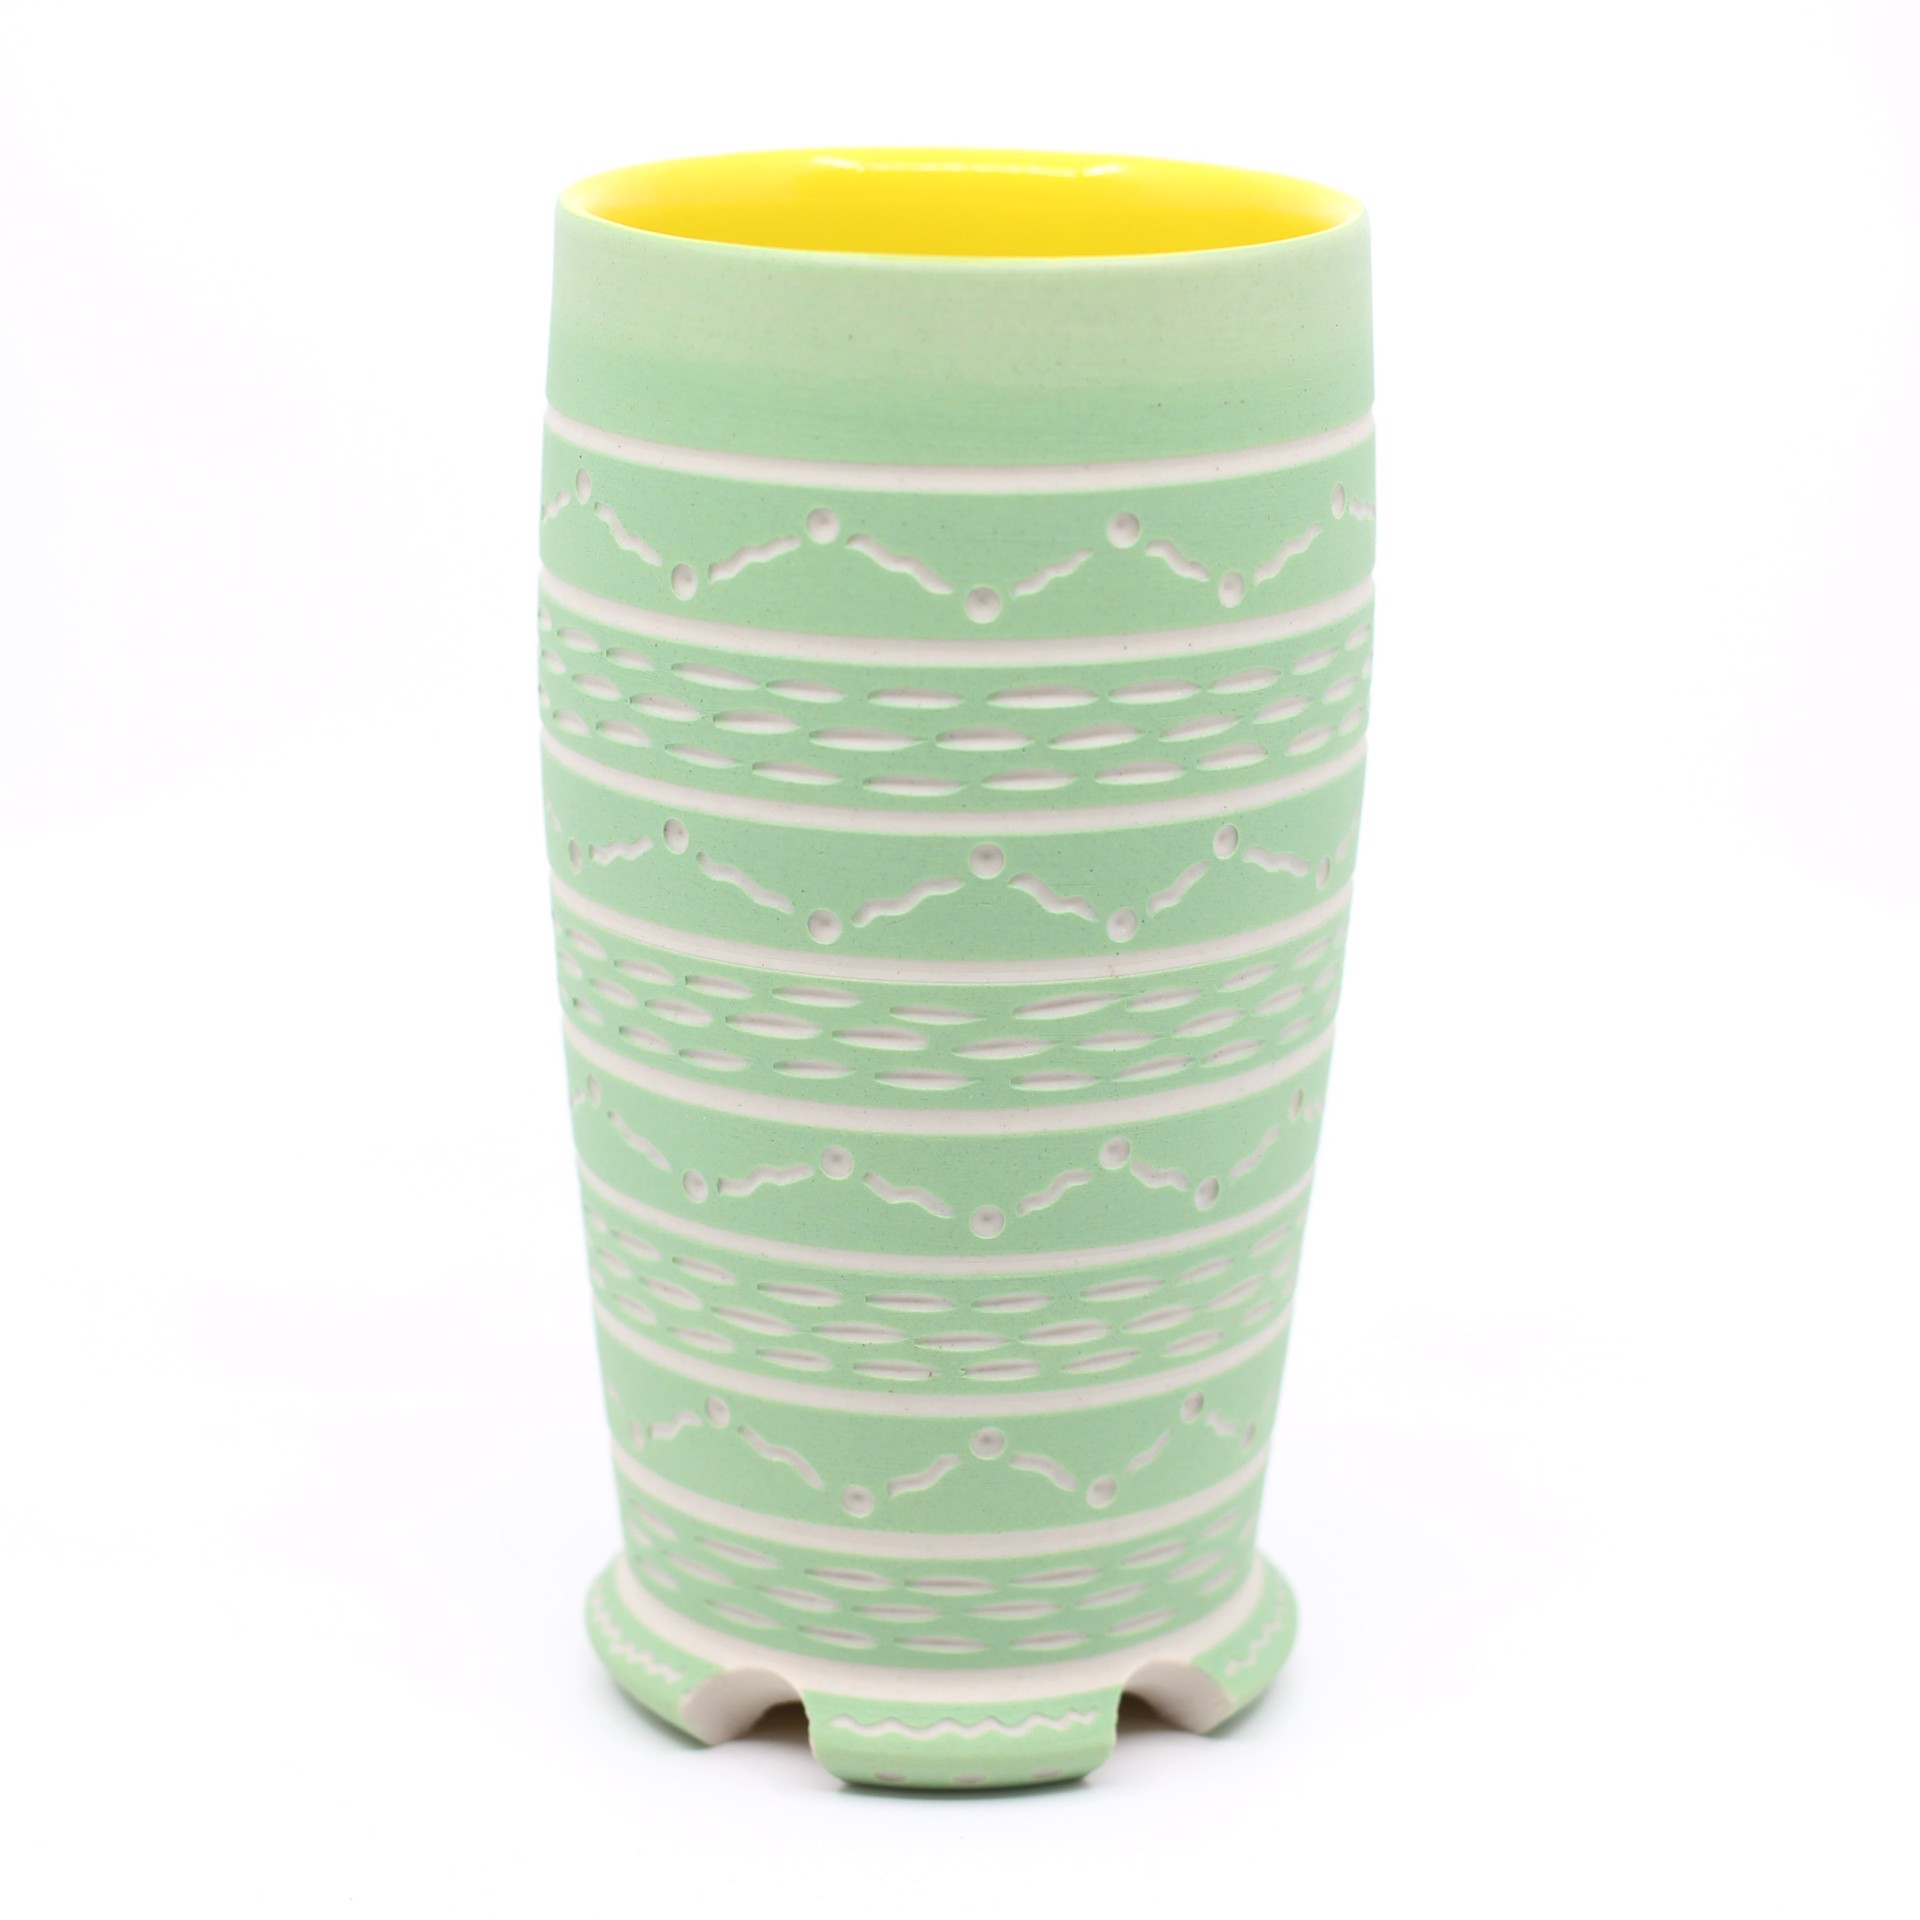 Green & Yellow Cup by Chris Casey